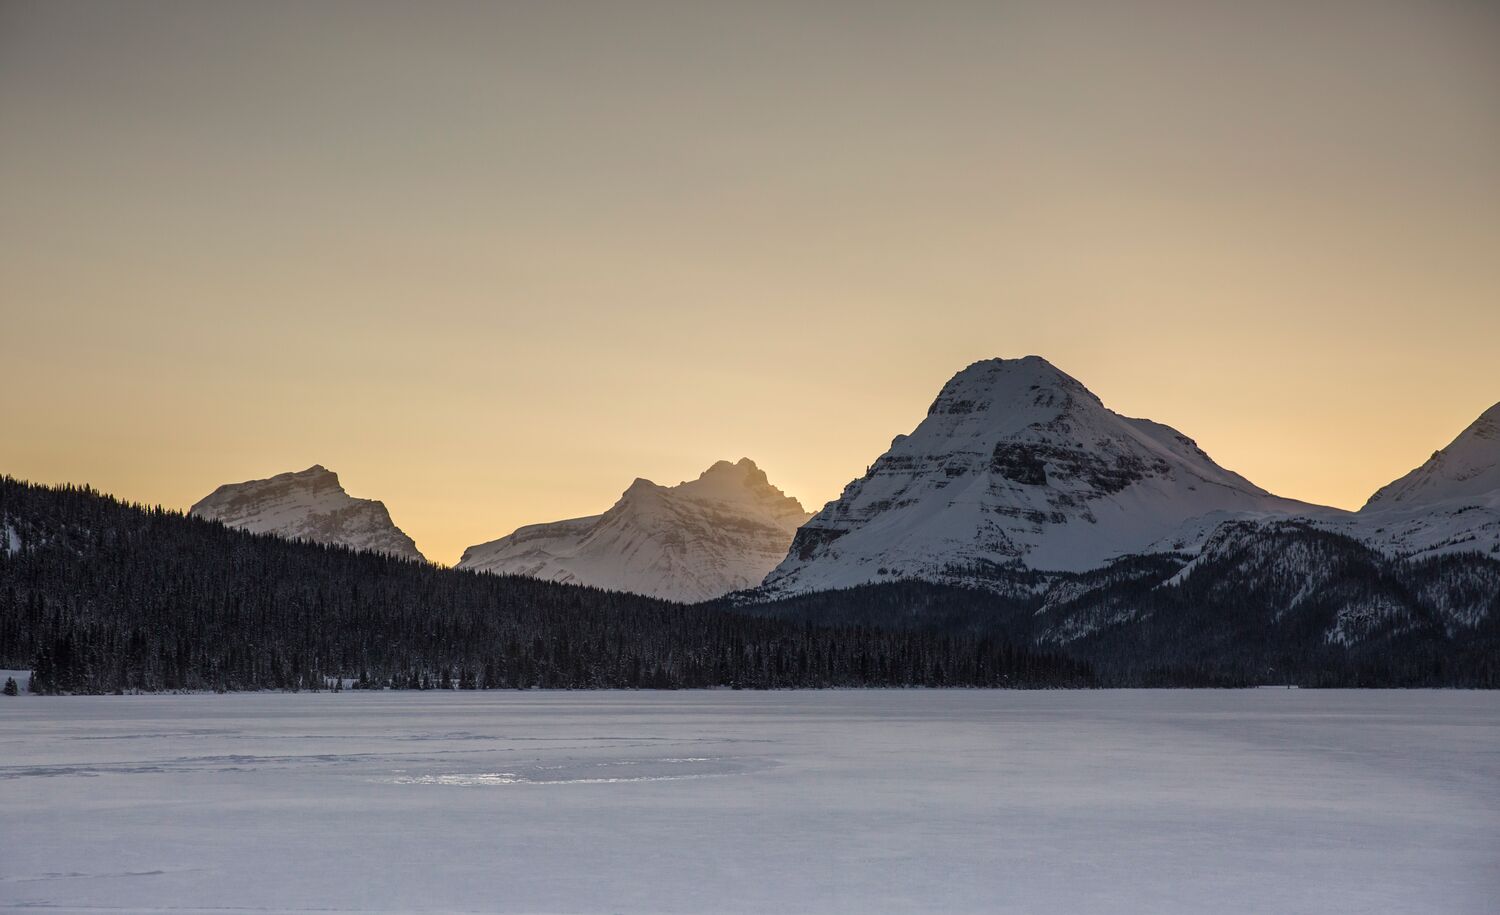 Bow Lake at sunset in the winter, looking towards three big mountains.